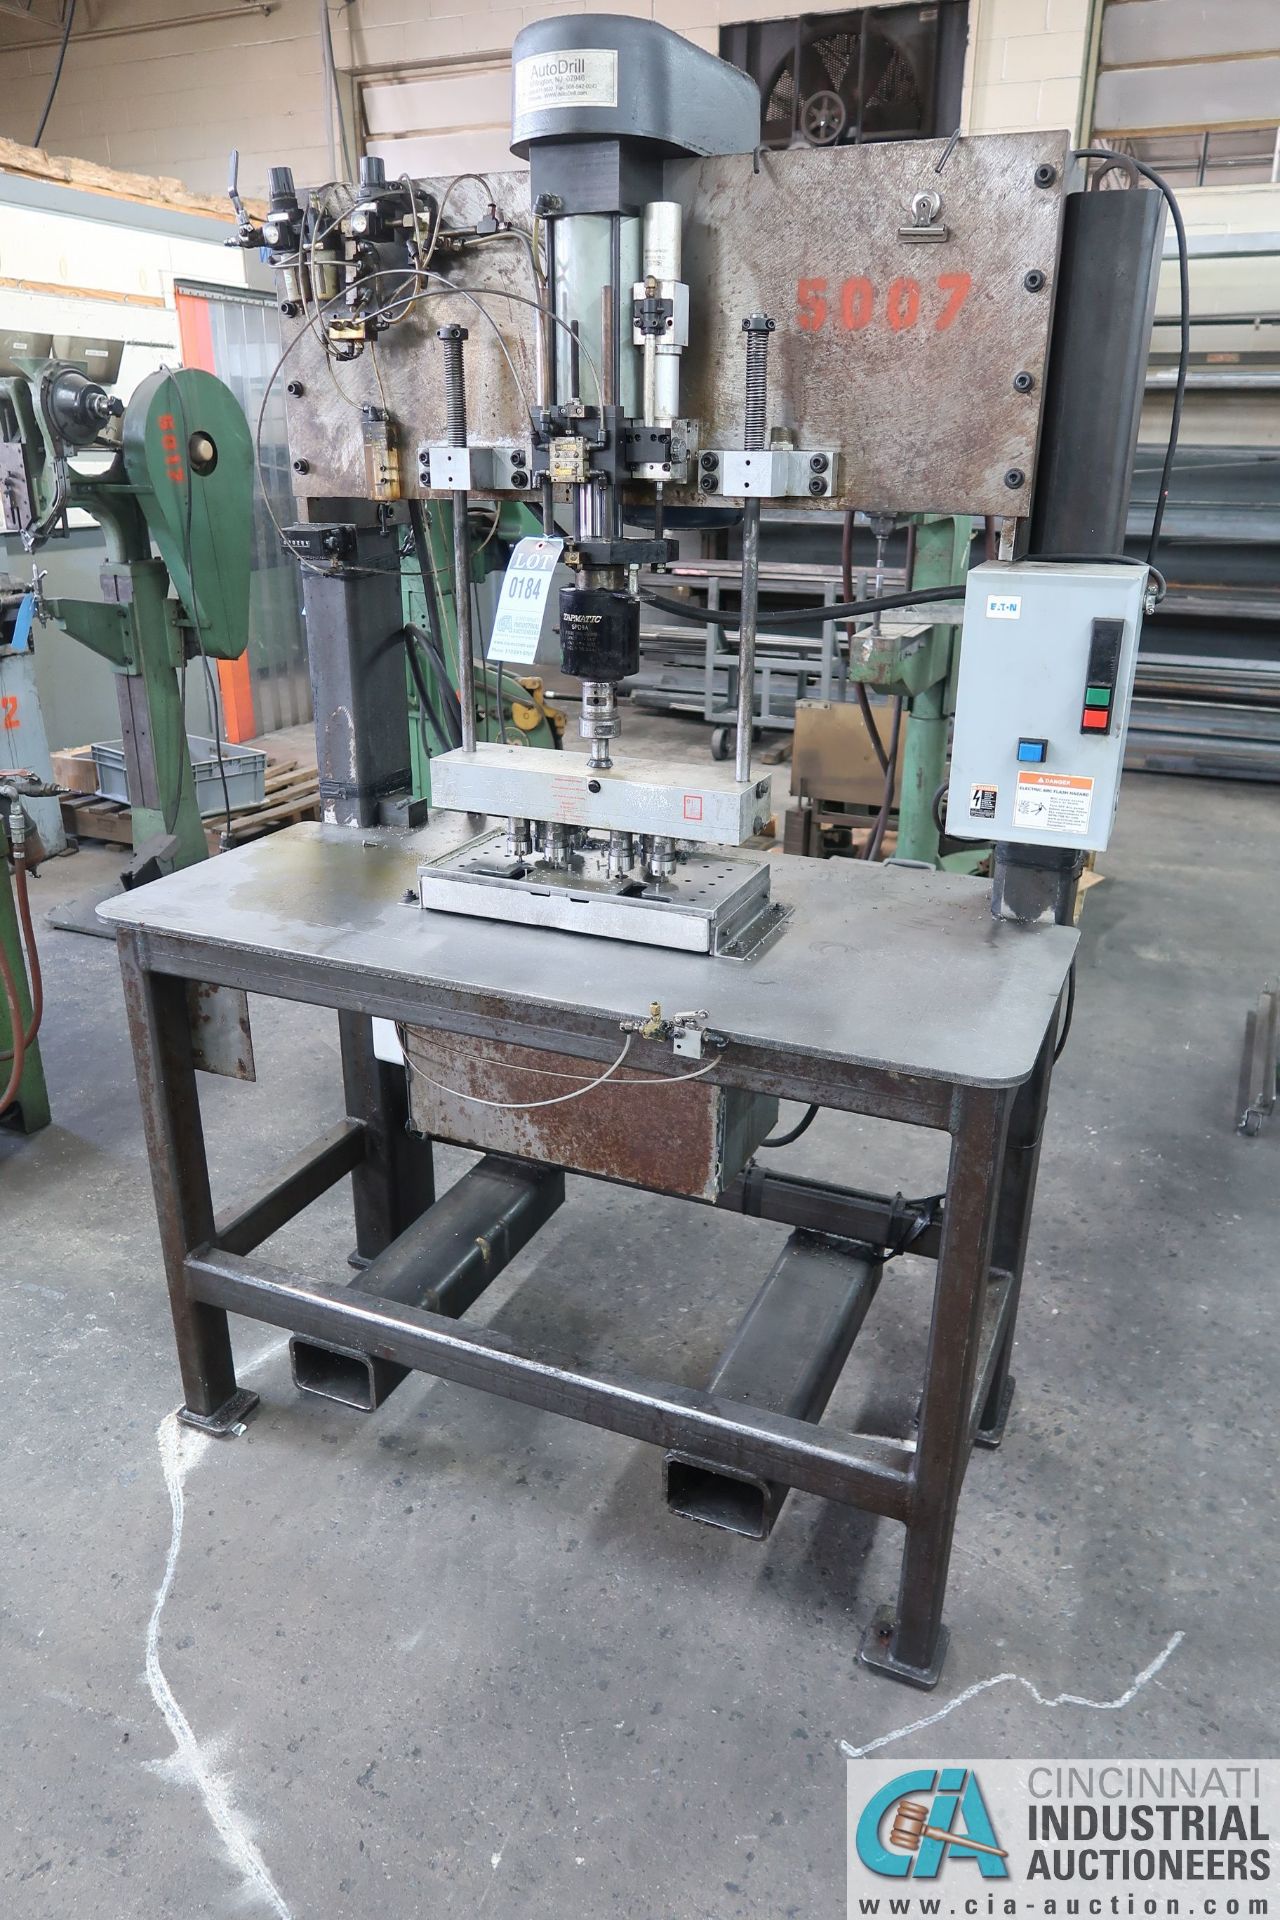 8-SPINDLE AUTO DRILL TAPPING MACHINE W/ TAPMATIC SPD9A HEAD